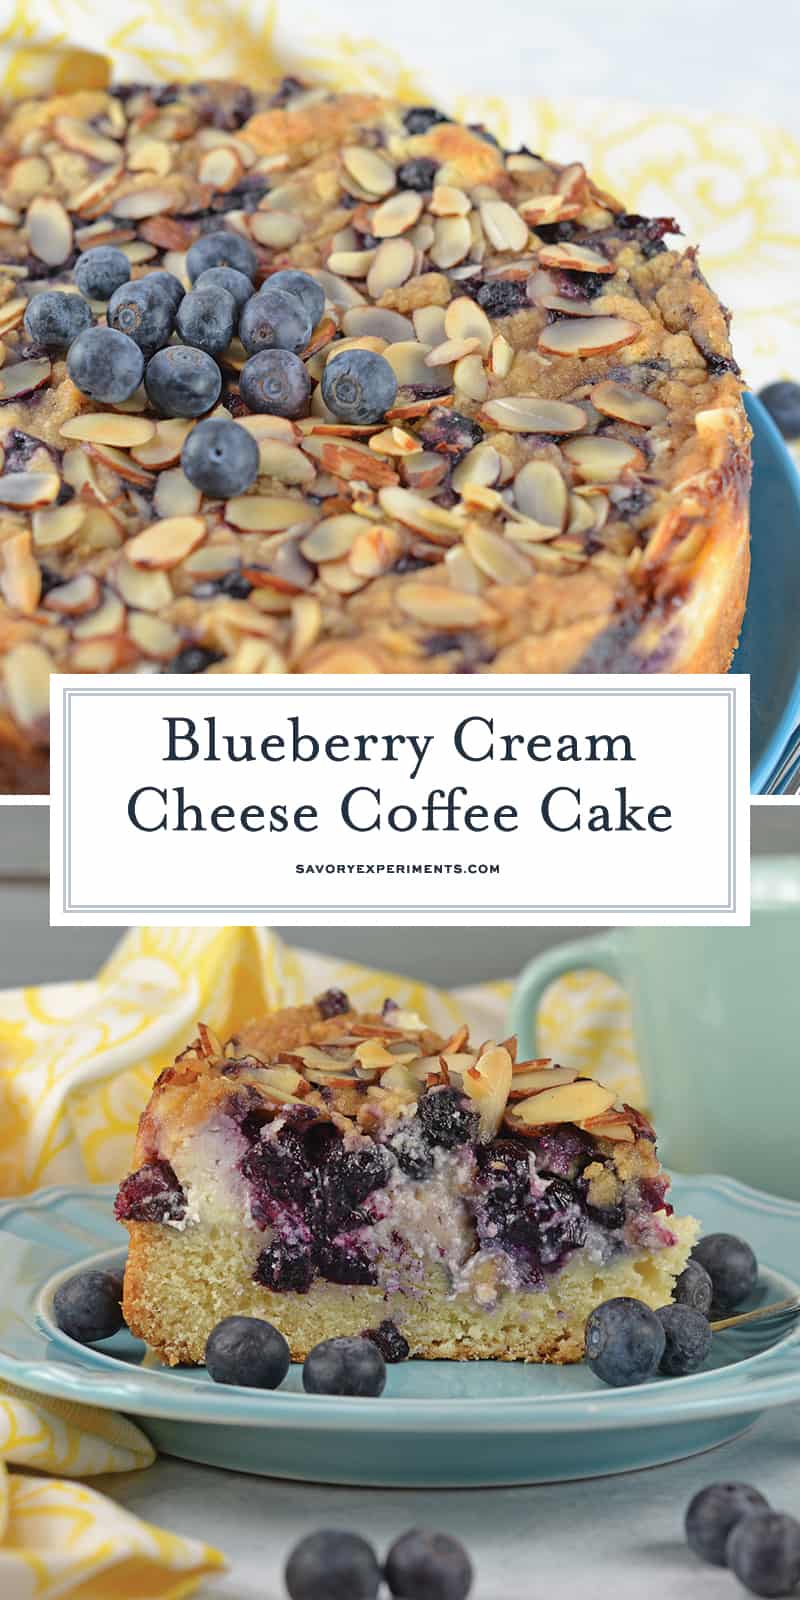 Blueberry Cream Cheese Coffee Cake is an easy coffee cake recipe with three layers of tender cake, silky cream cheese and almond streusel topping. #creamcheesecoffeecake #coffeecakerecipe #creamcheesecoffeecake www.savoryexperiments.com 